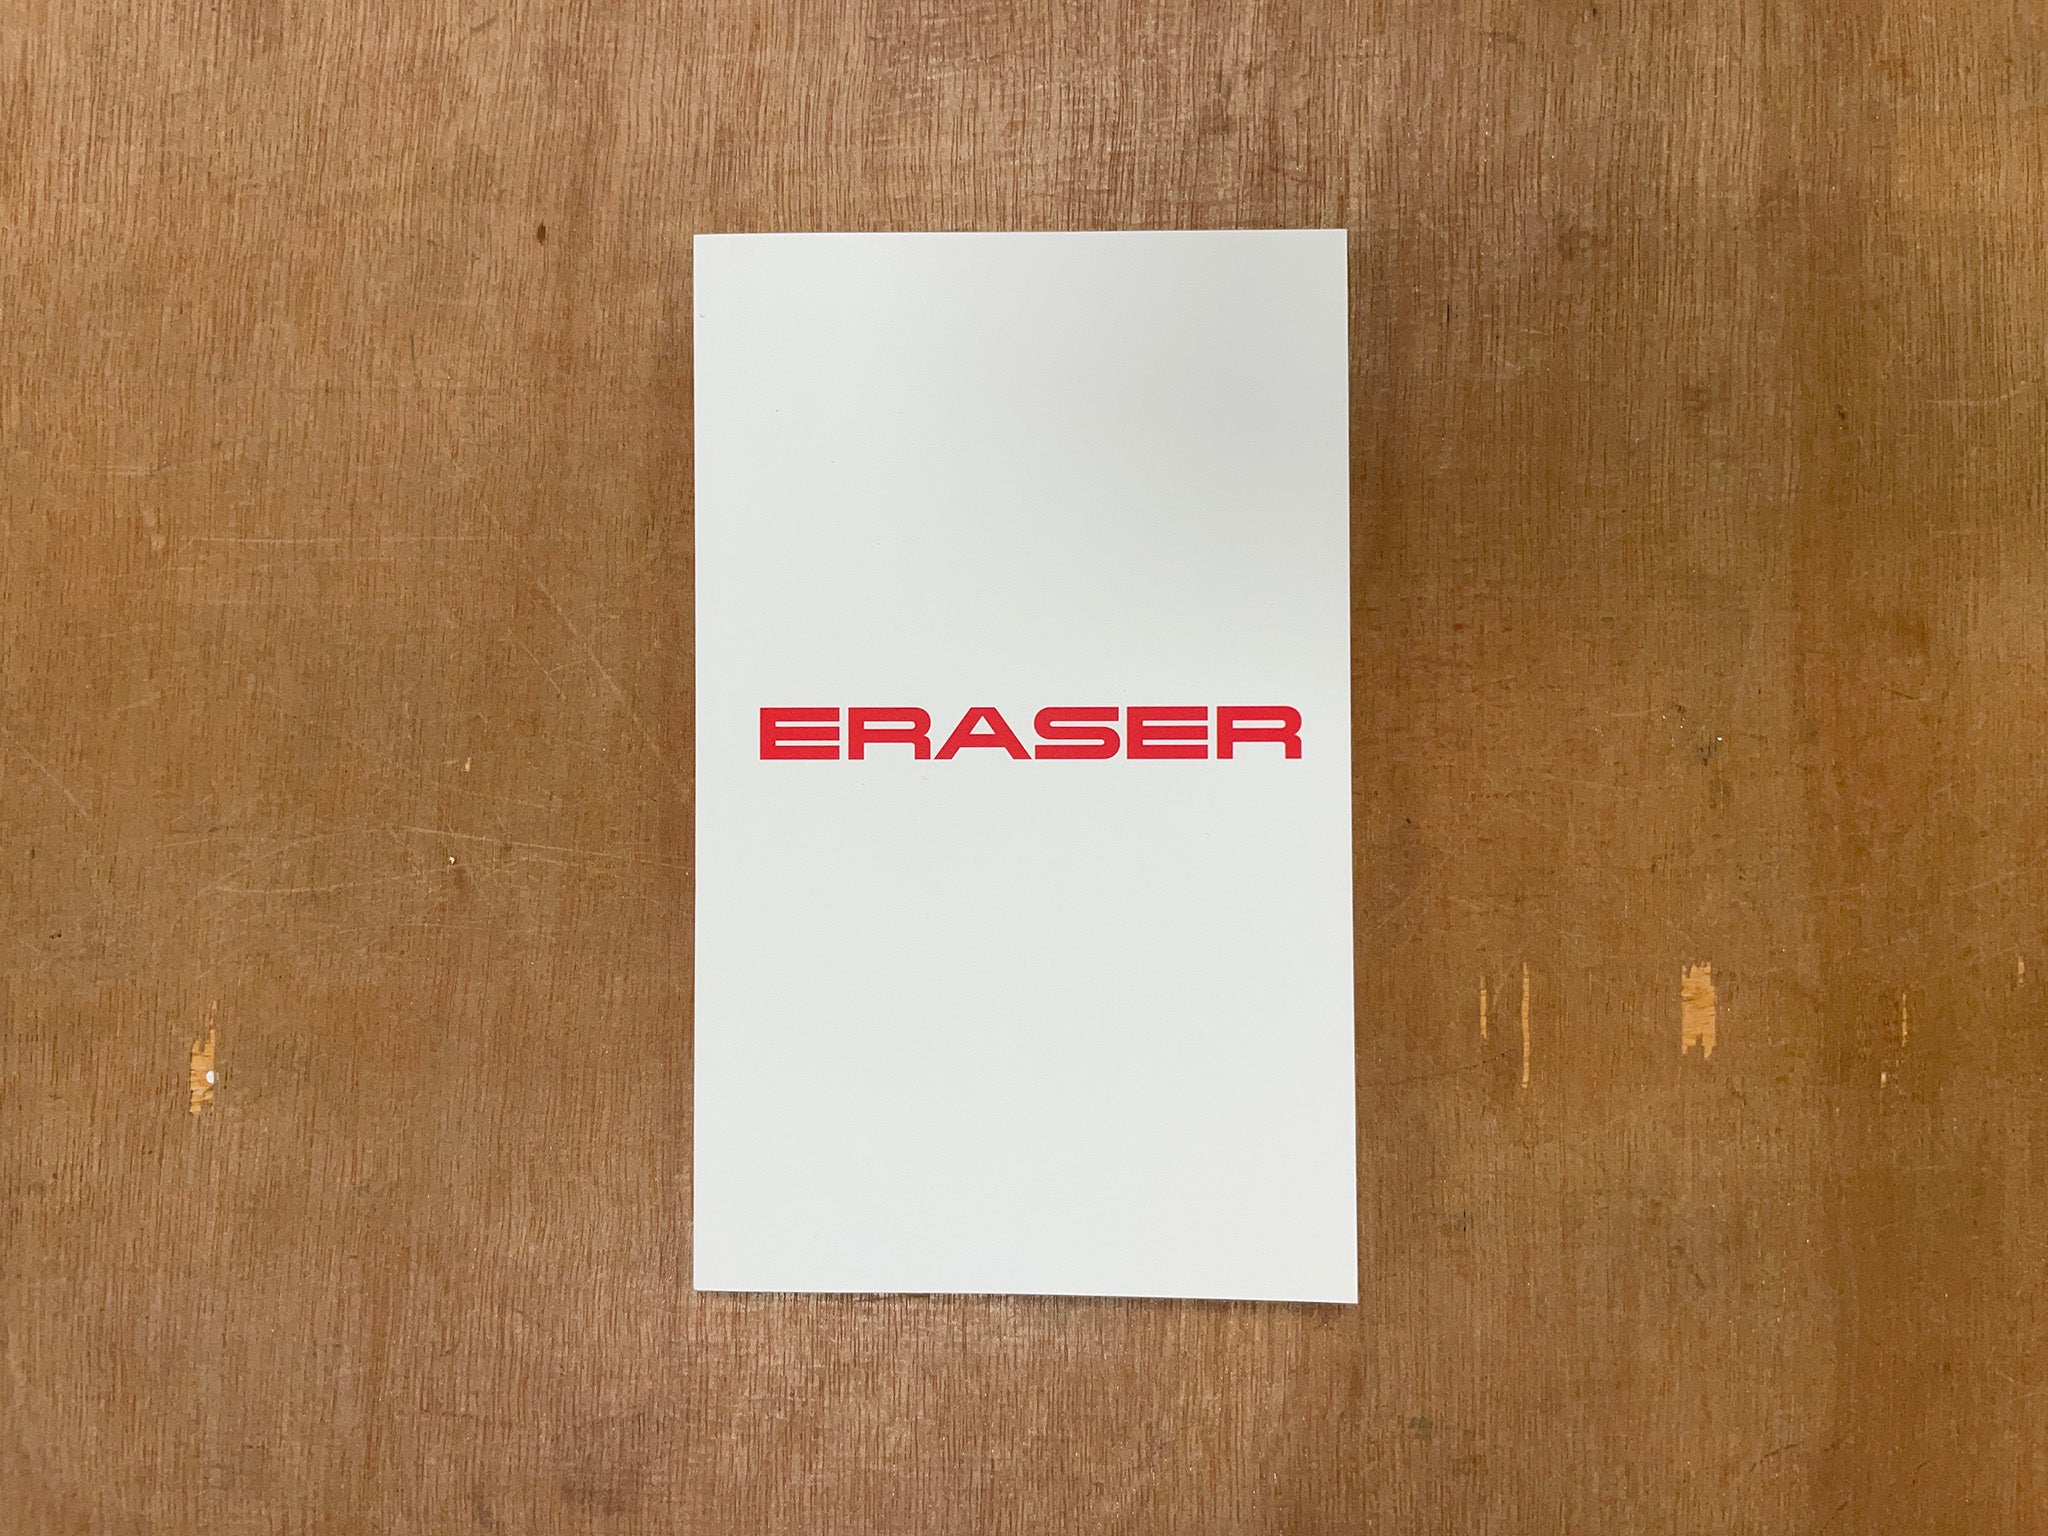 ERASER by Angharad Williams